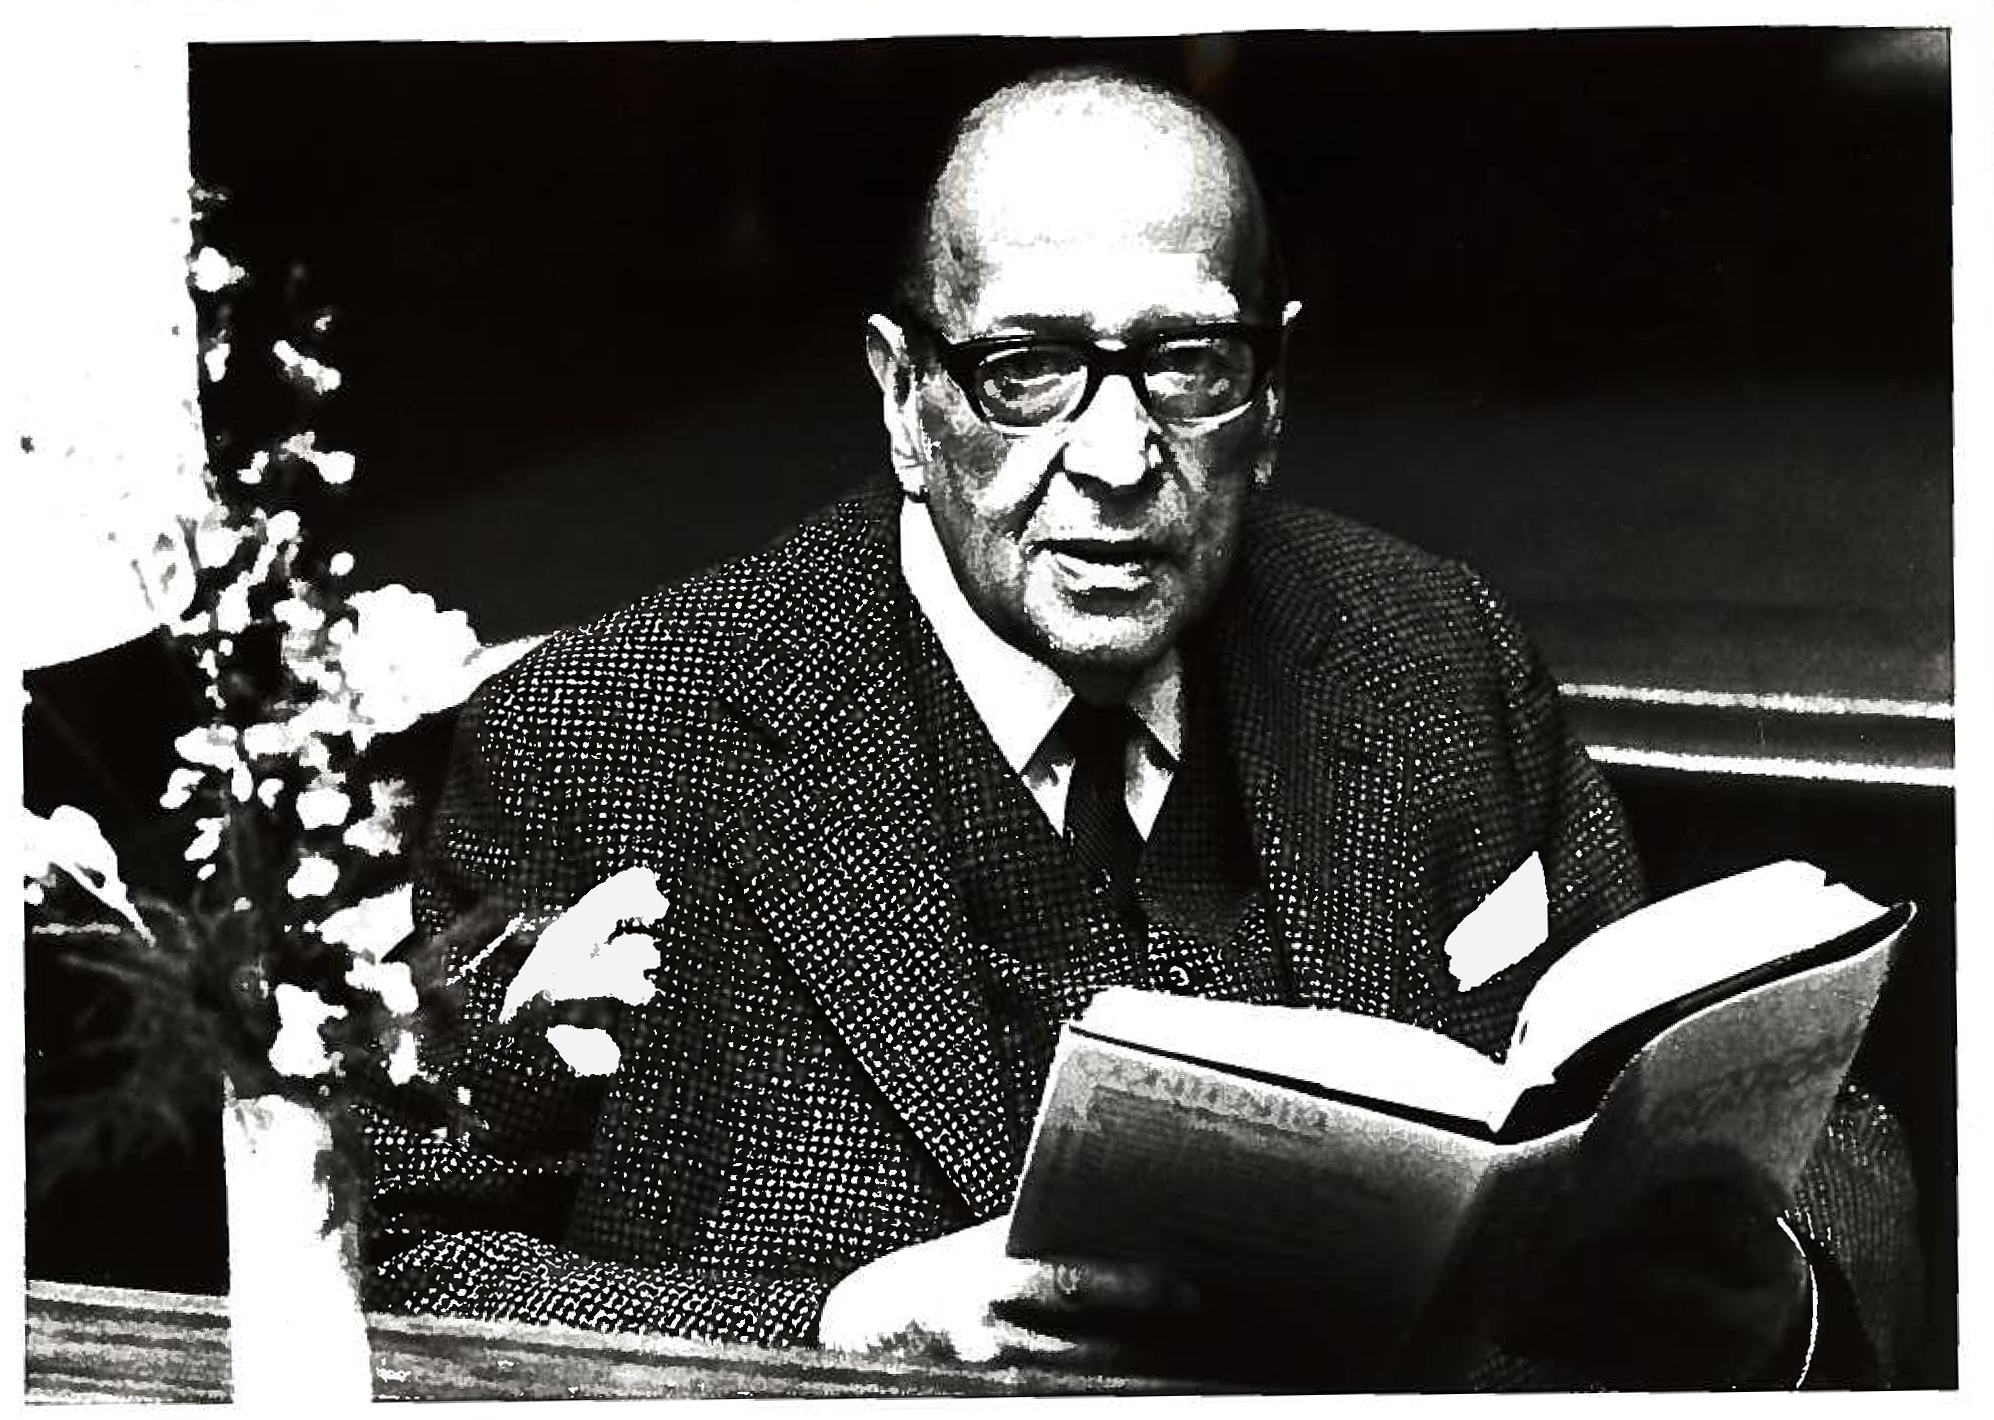 Horkheimer reading a copy of The Dialectical Imagination, just after it came out and shortly before his death.